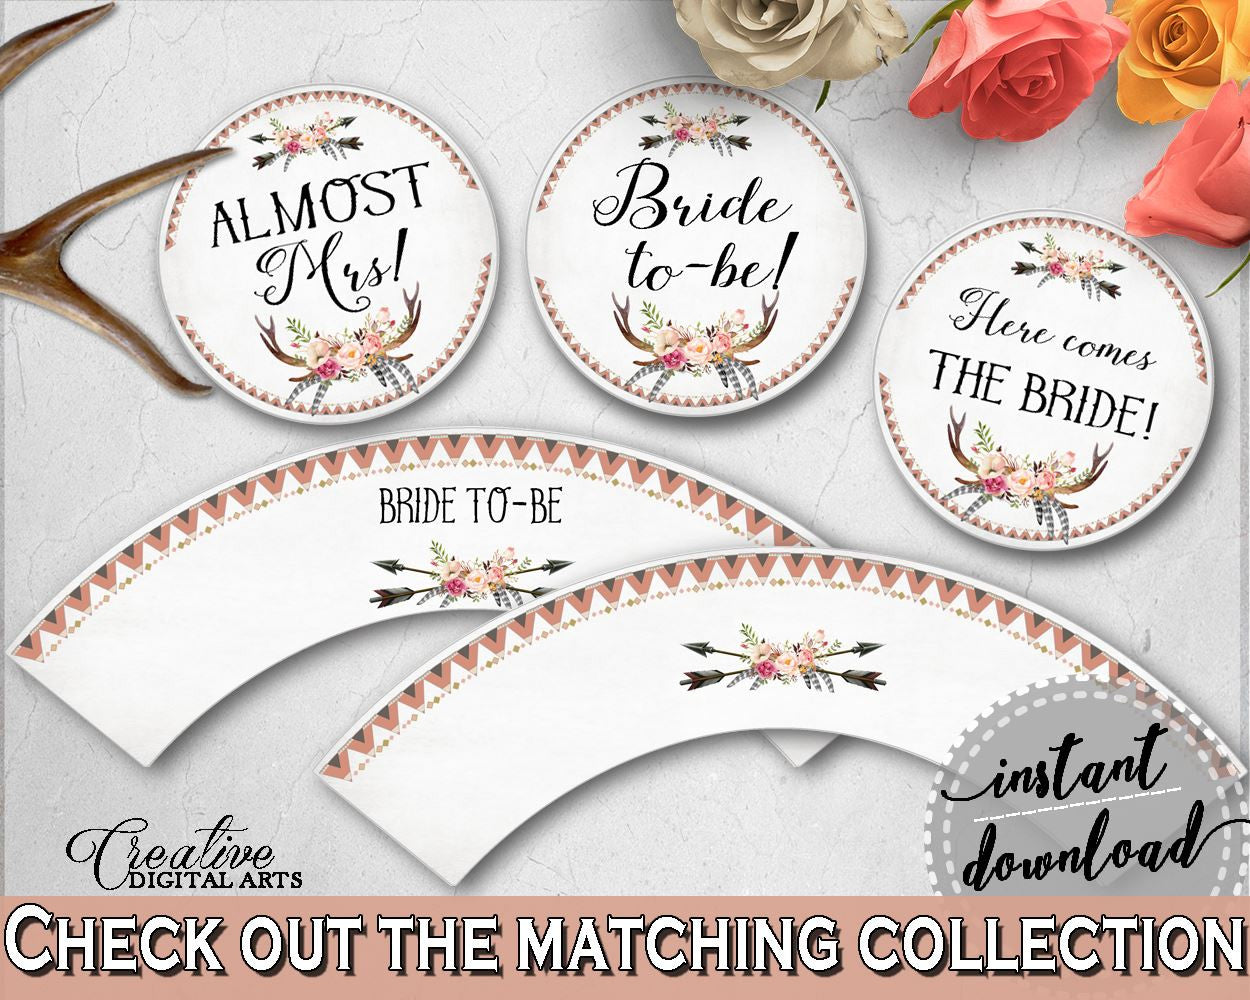 Cupcake Toppers And Wrappers in Antlers Flowers Bohemian Bridal Shower Gray and Pink Theme, almost mrs, party plan, party planning - MVR4R - Digital Product